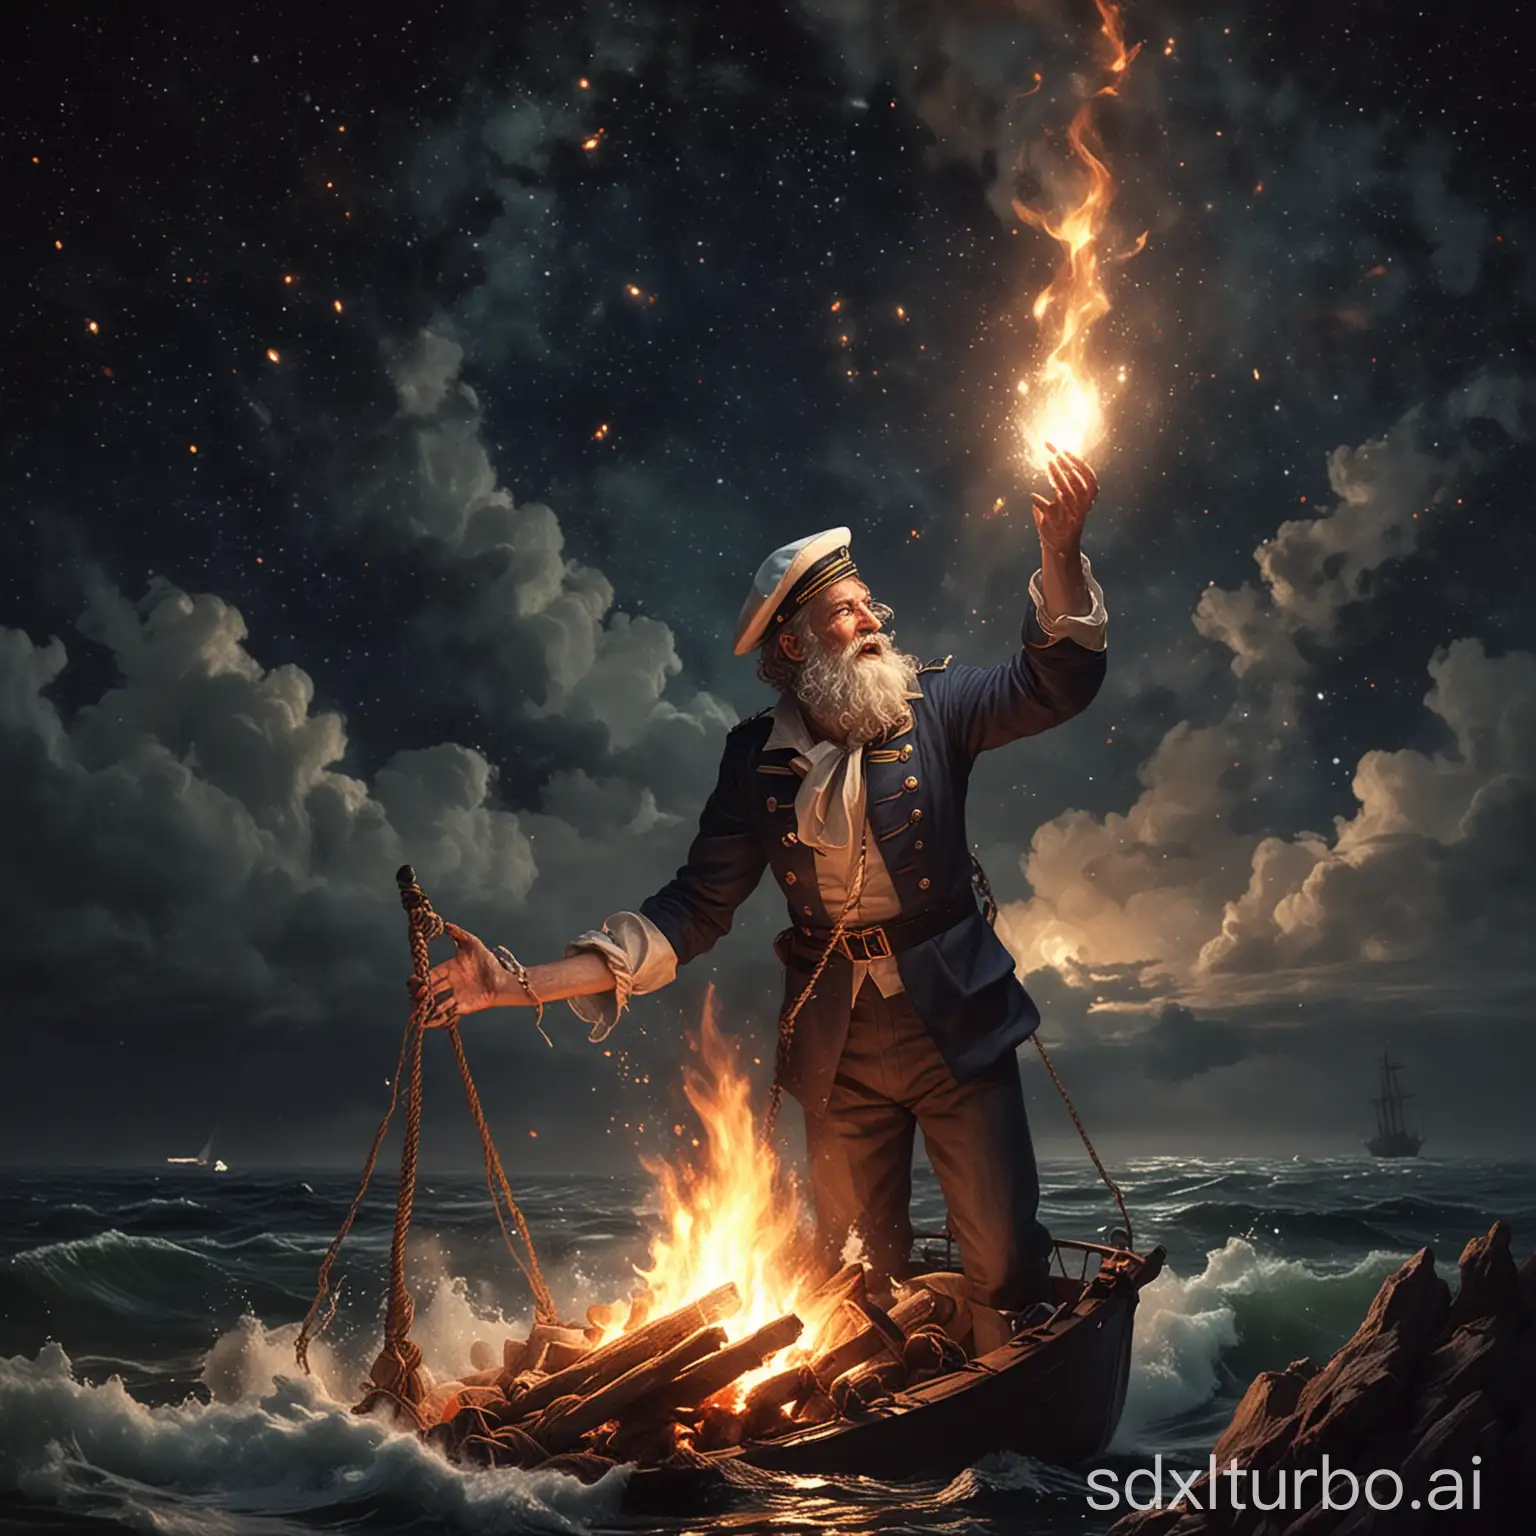 Gather 'round the fire, bright and high
For a sailor's yarn under the night sky
[VERSE]
As a fledgling young, on the salty breeze
I heard old sailors sing with glee
Of a creature vast, in waters deep
A gentle giant, not for the weak
[INTRO]
